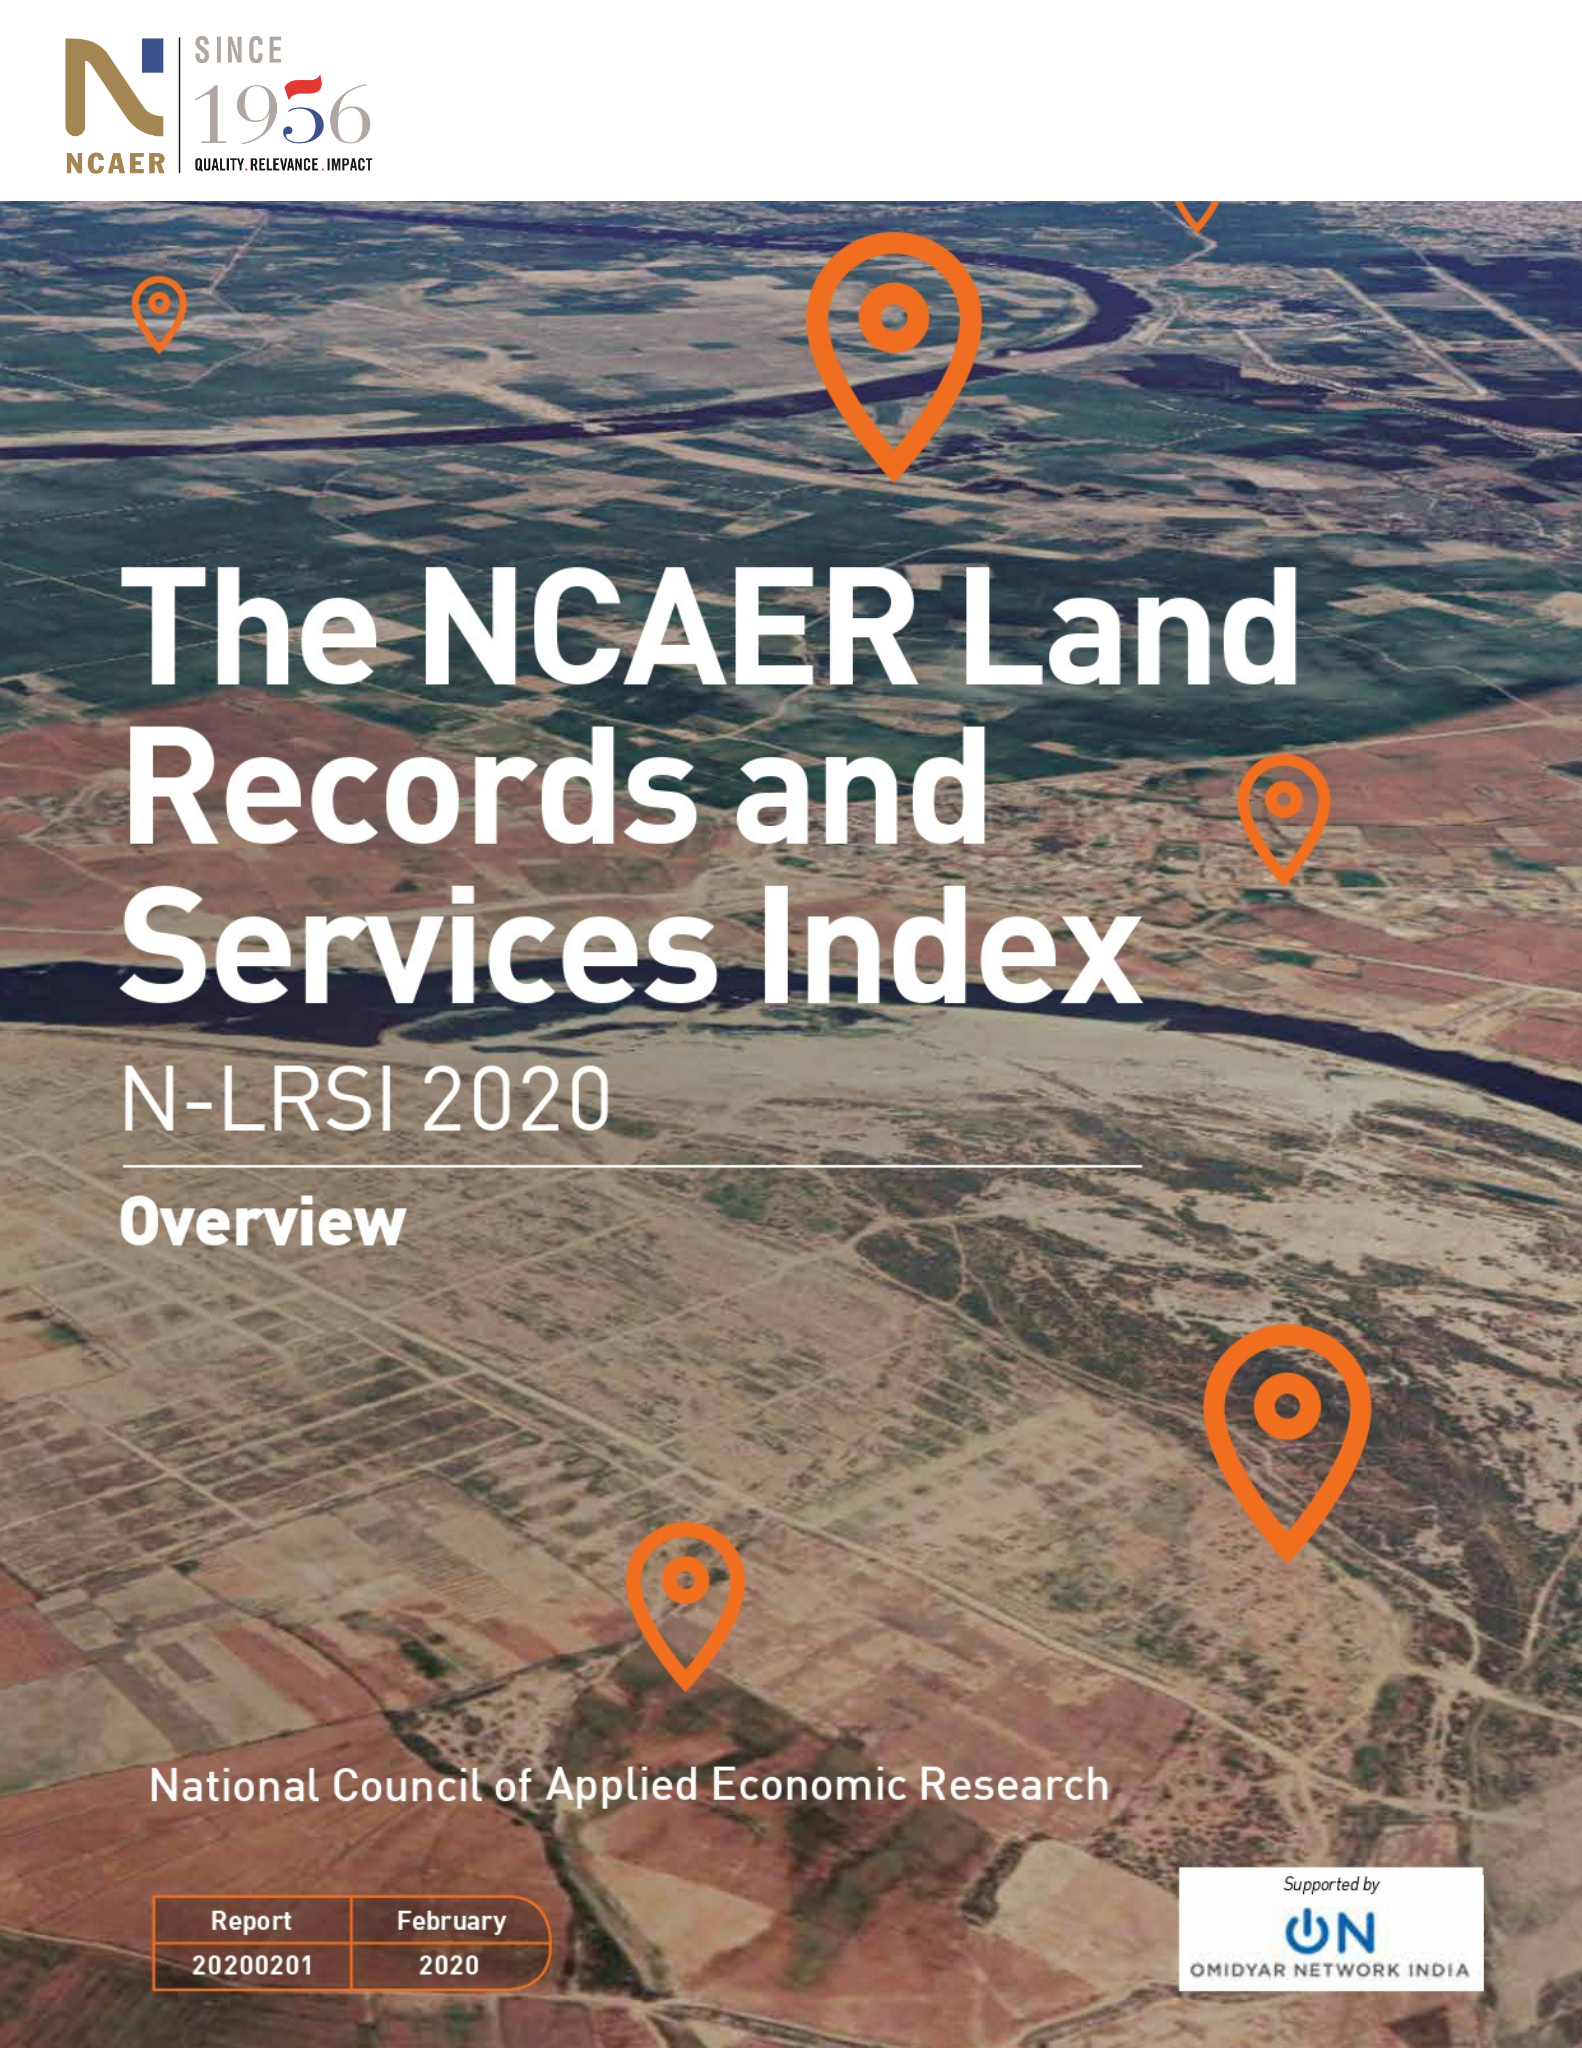 NCAER Land Records and Services Index (N-LRSI) 2020: Overview